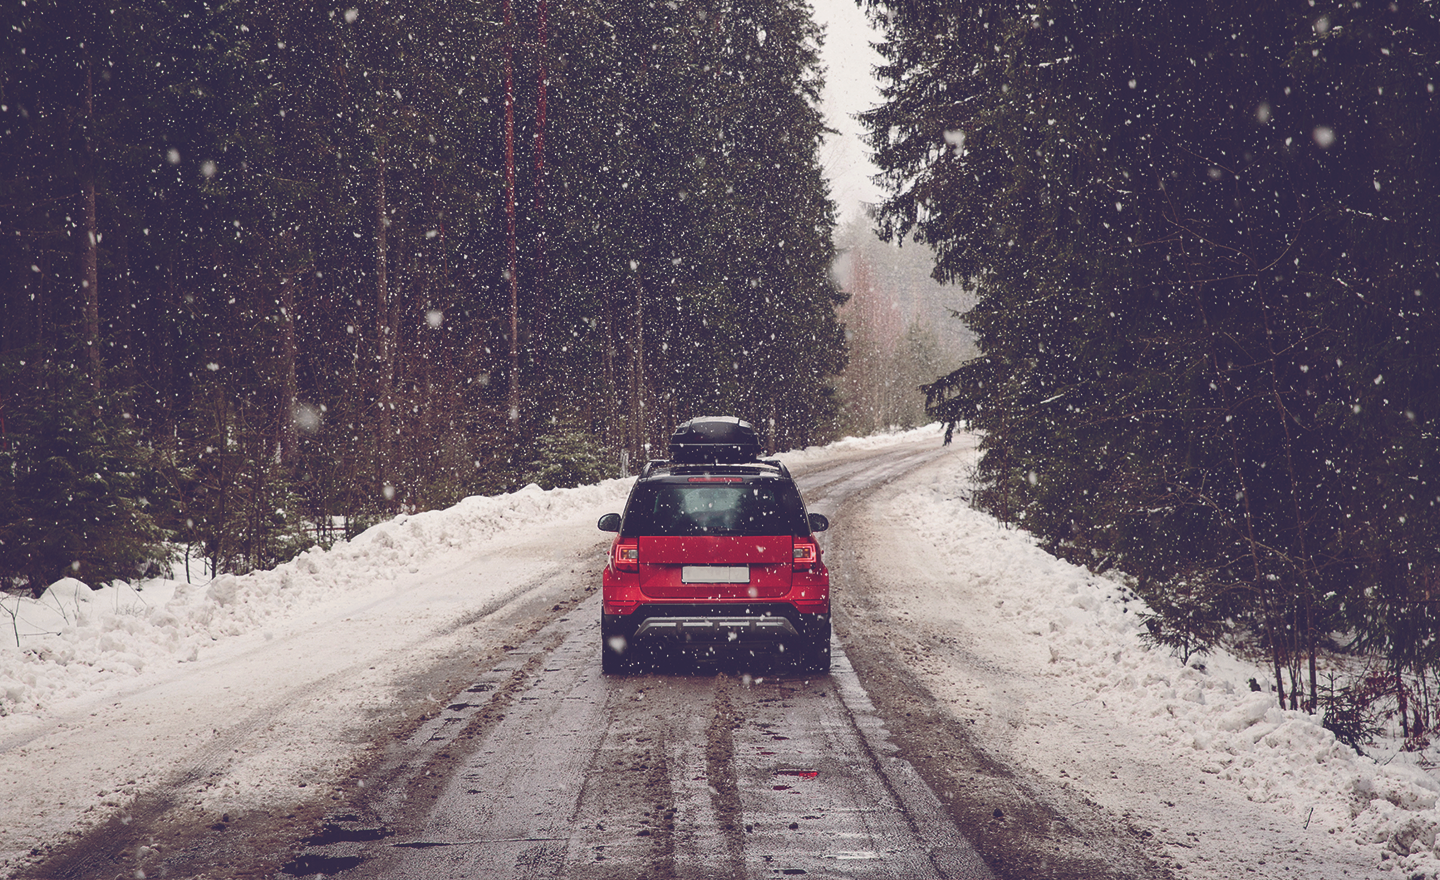 Red car with roof rack drives through snow covered forest